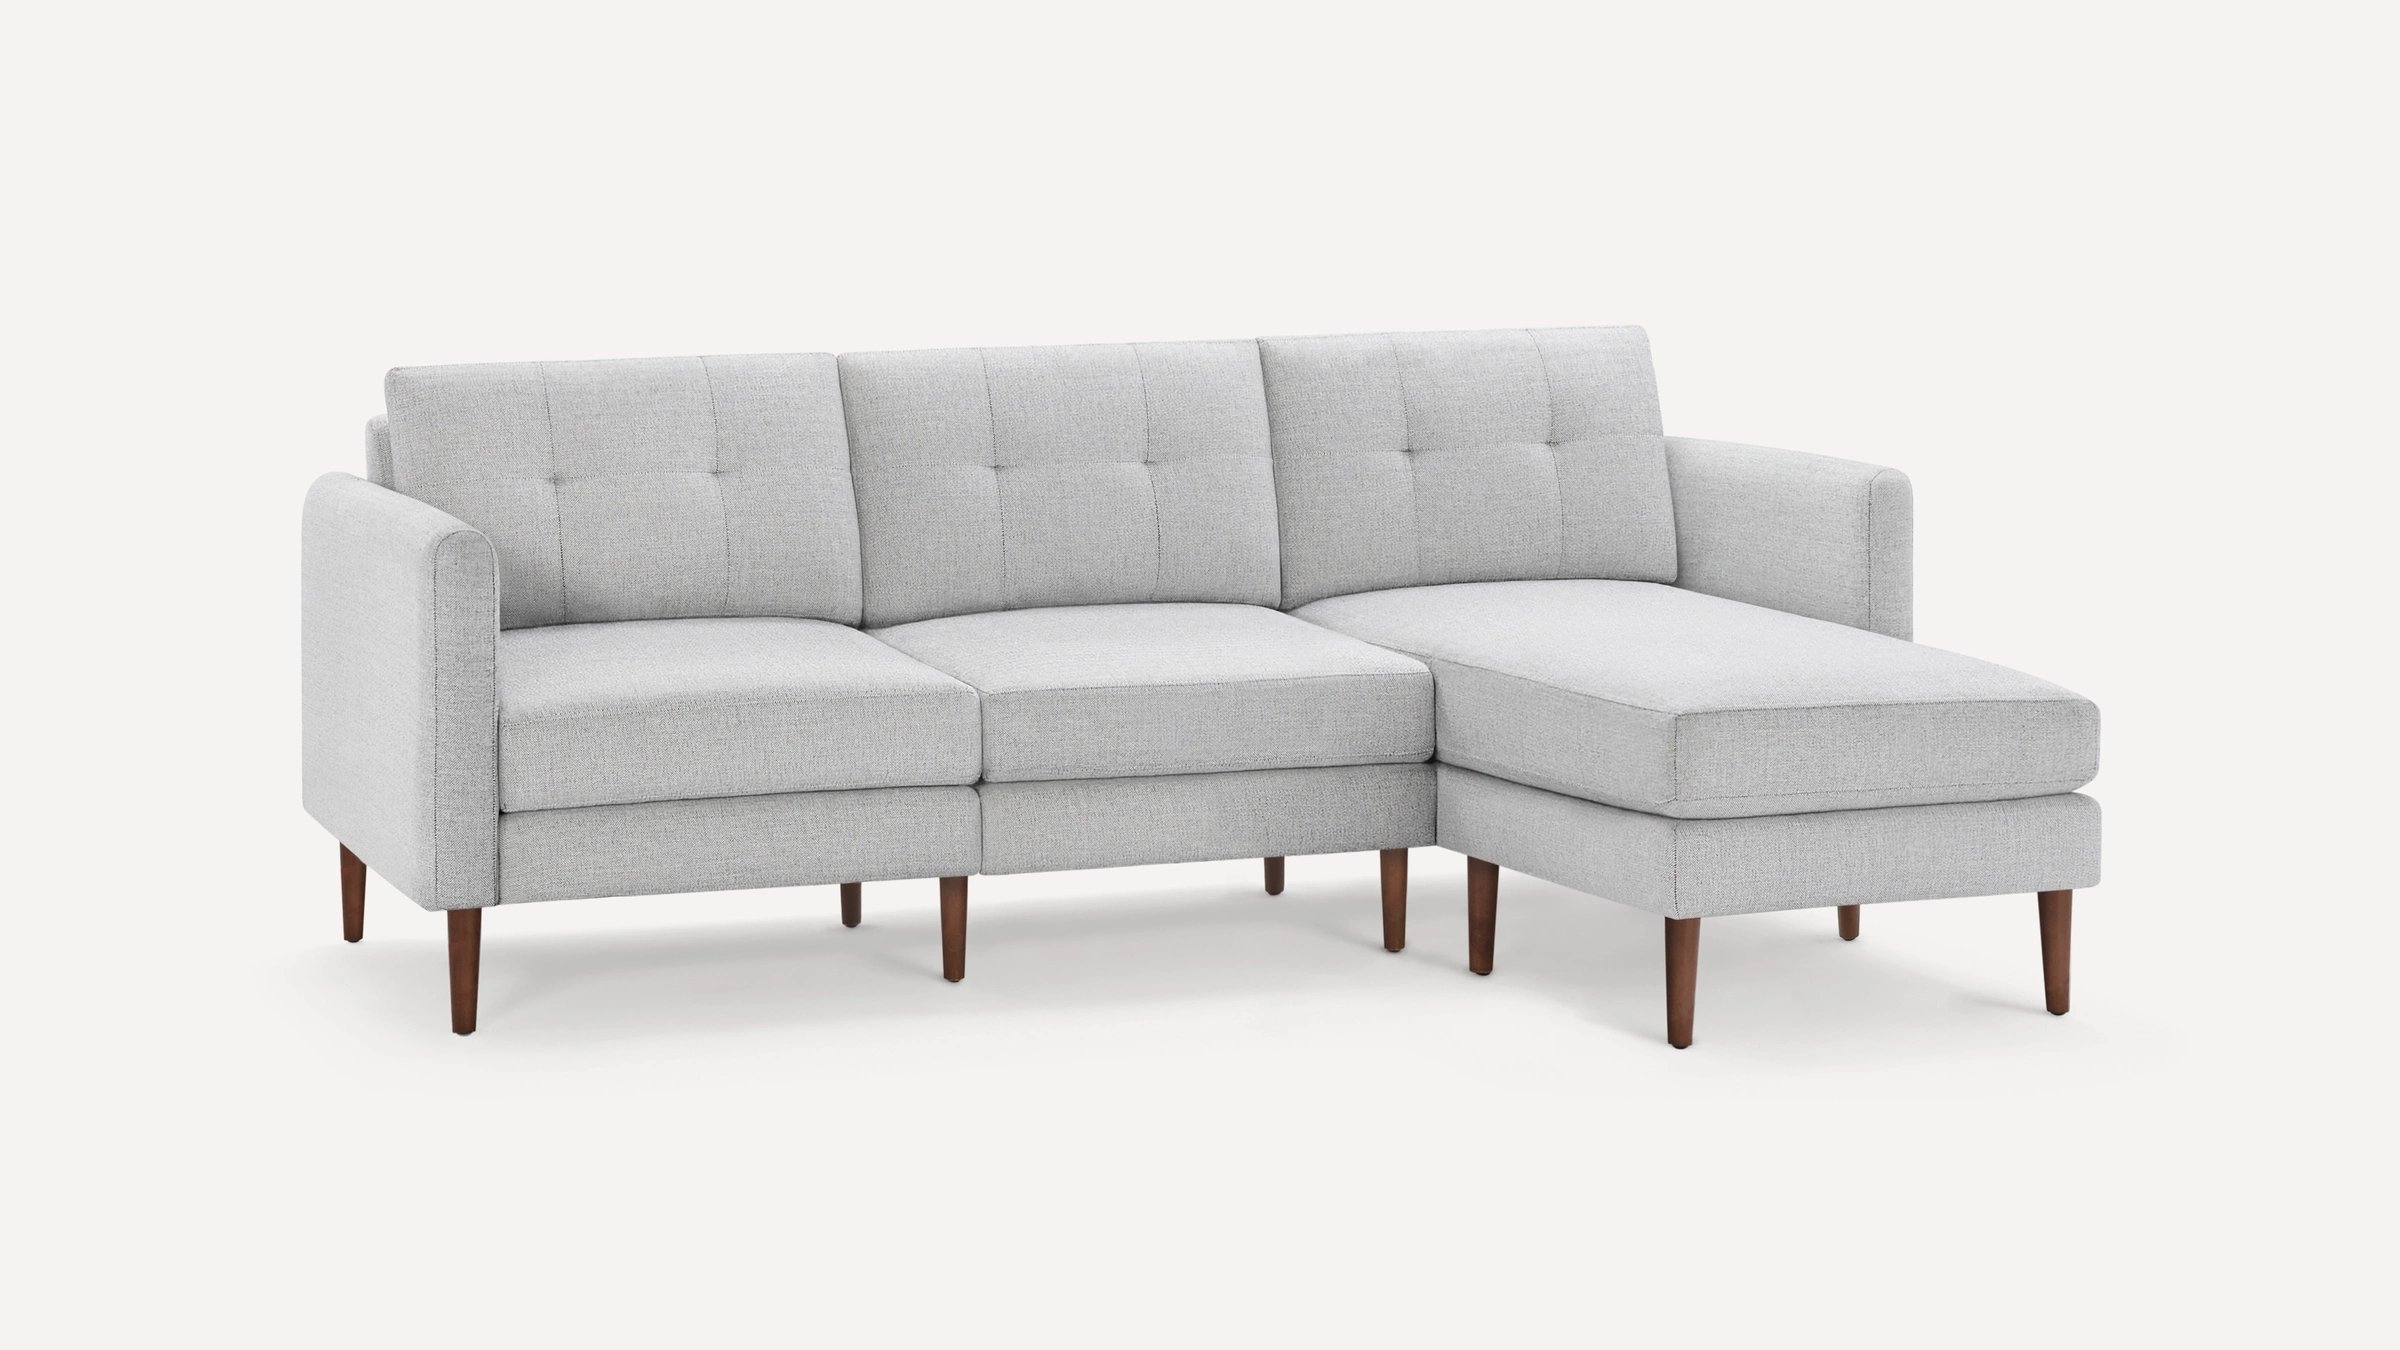 Arch Nomad Sofa Sectional - Walnut legs - Arch arms - Moveable chaise - Image 0